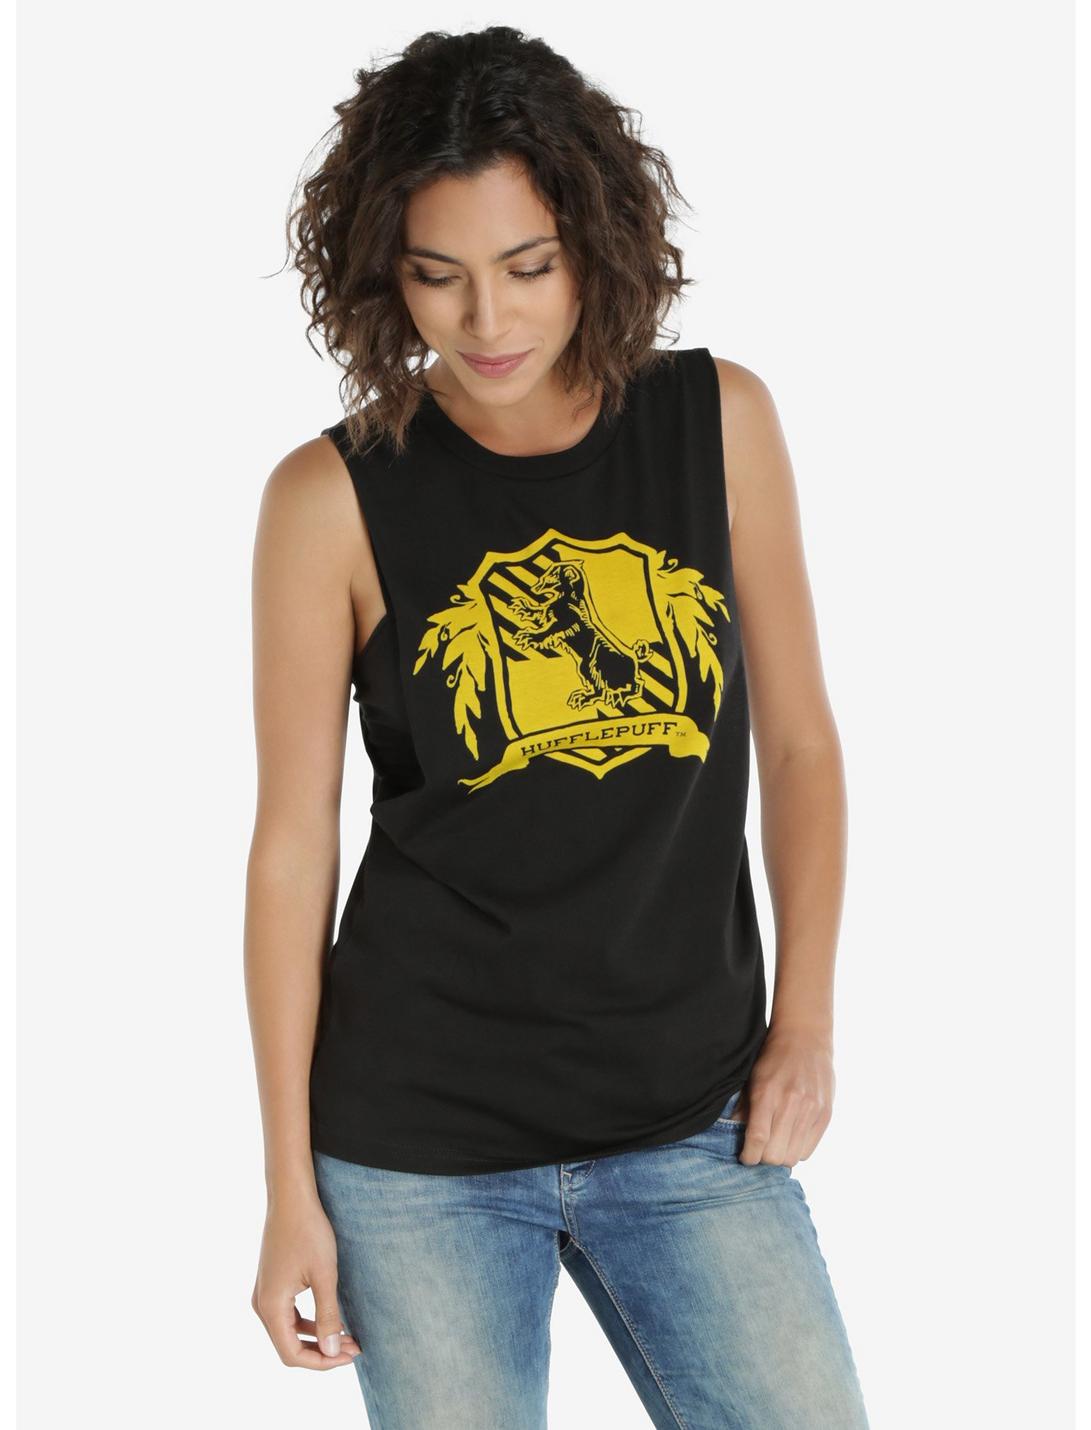 Harry Potter Hufflepuff Womens Muscle Top, BLACK, hi-res